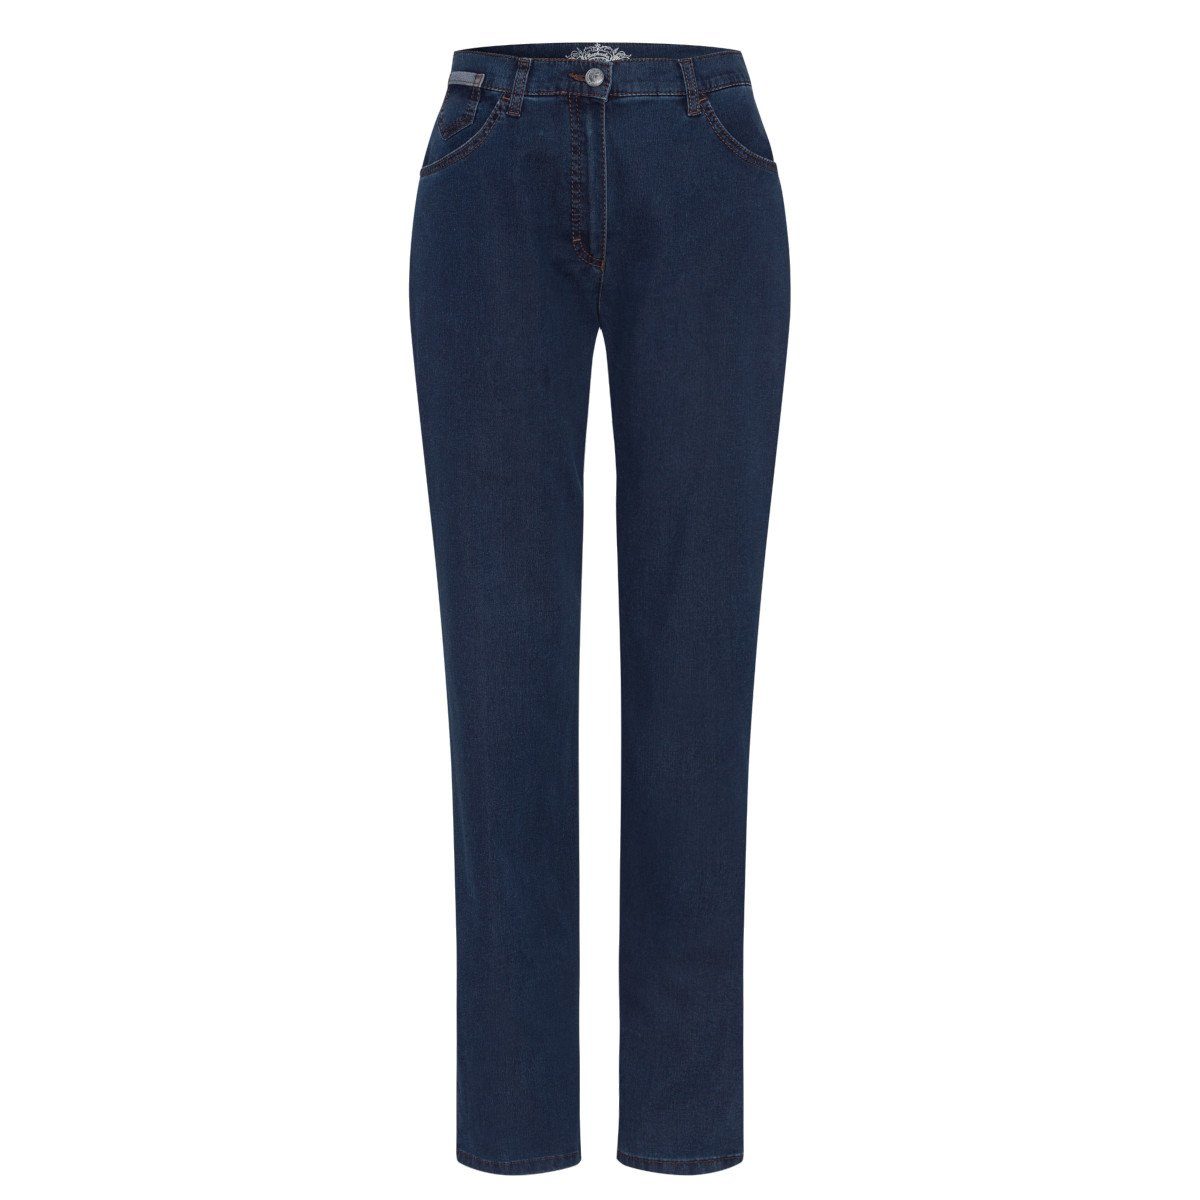 stoned 5-Pocket-Jeans Comfort RAPHAELA by Plus (25) COMFORT BRAX Fay Corry FIT